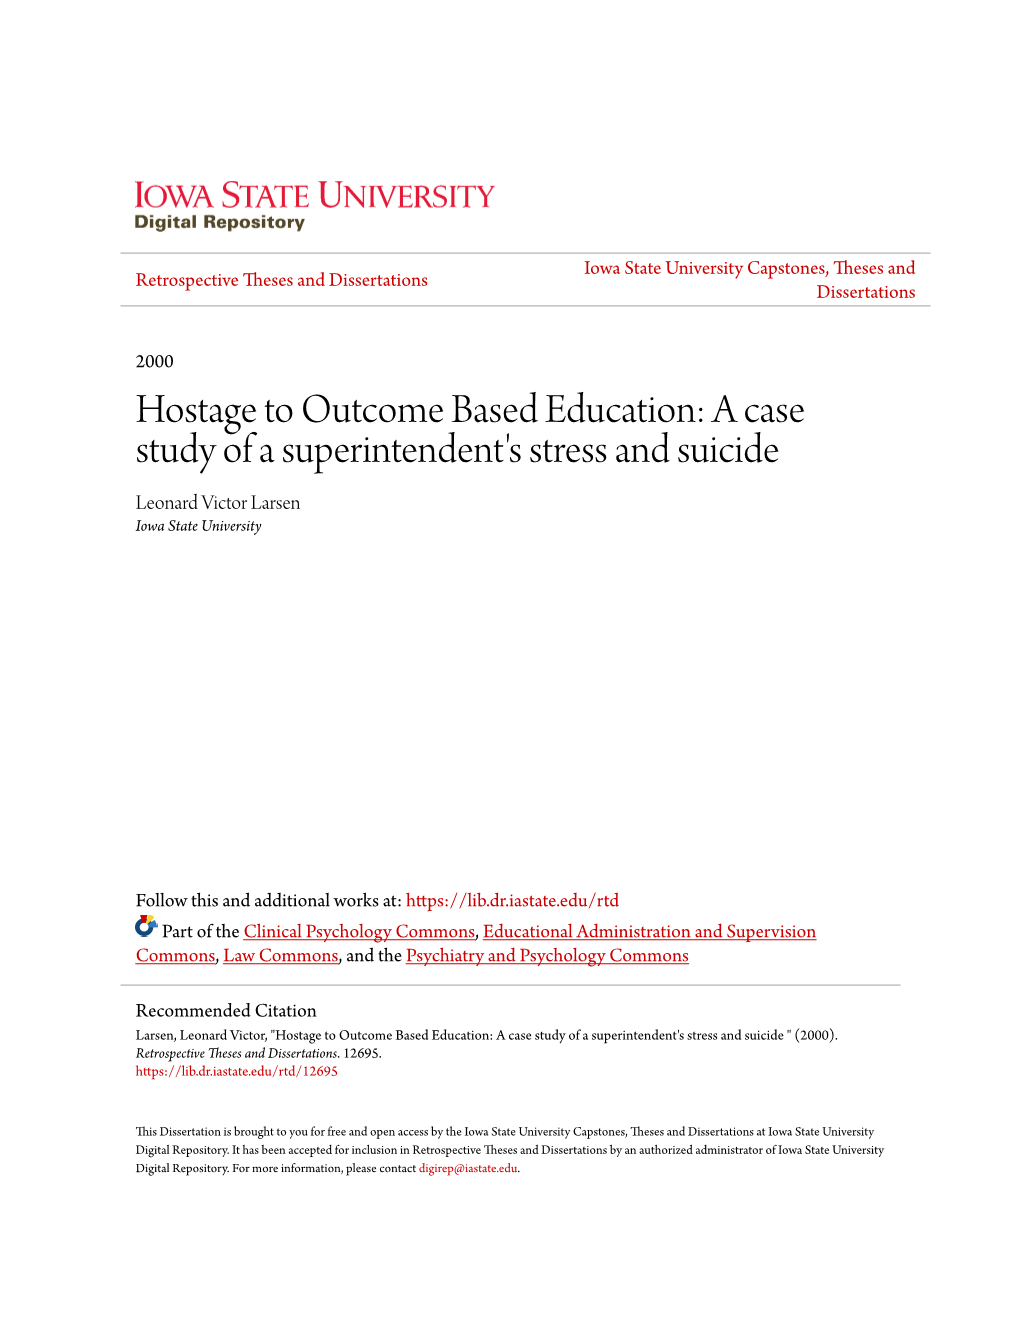 Hostage to Outcome Based Education: a Case Study of a Superintendent's Stress and Suicide Leonard Victor Larsen Iowa State University